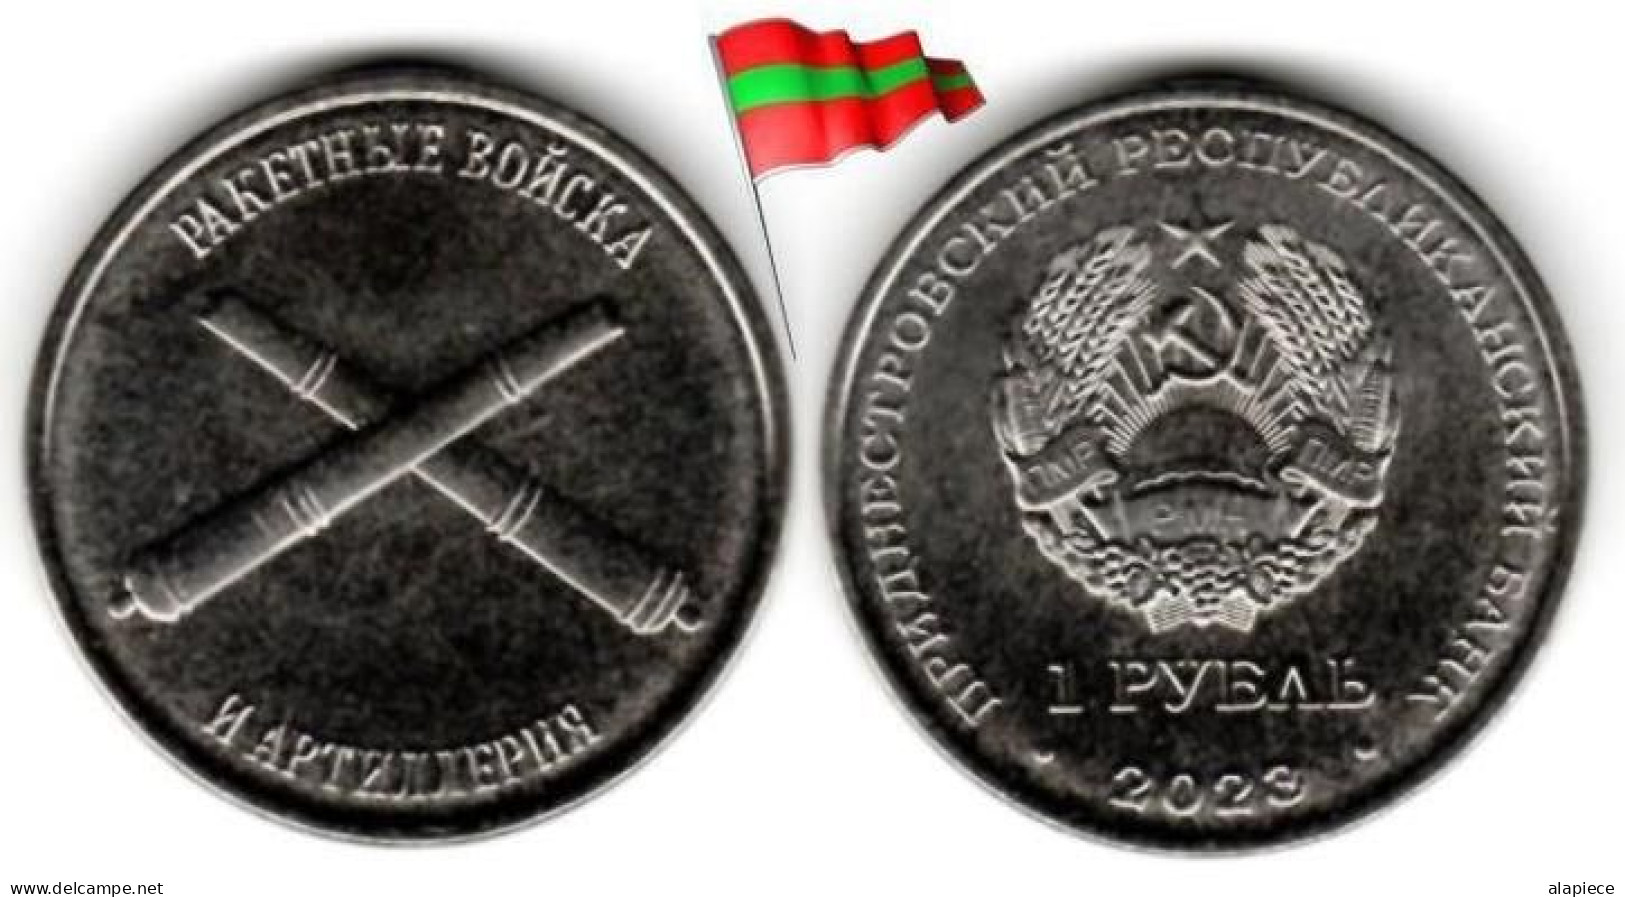 Transnistria - 1 Rouble 2023 (Rocket Forces And Artillery) - Moldova